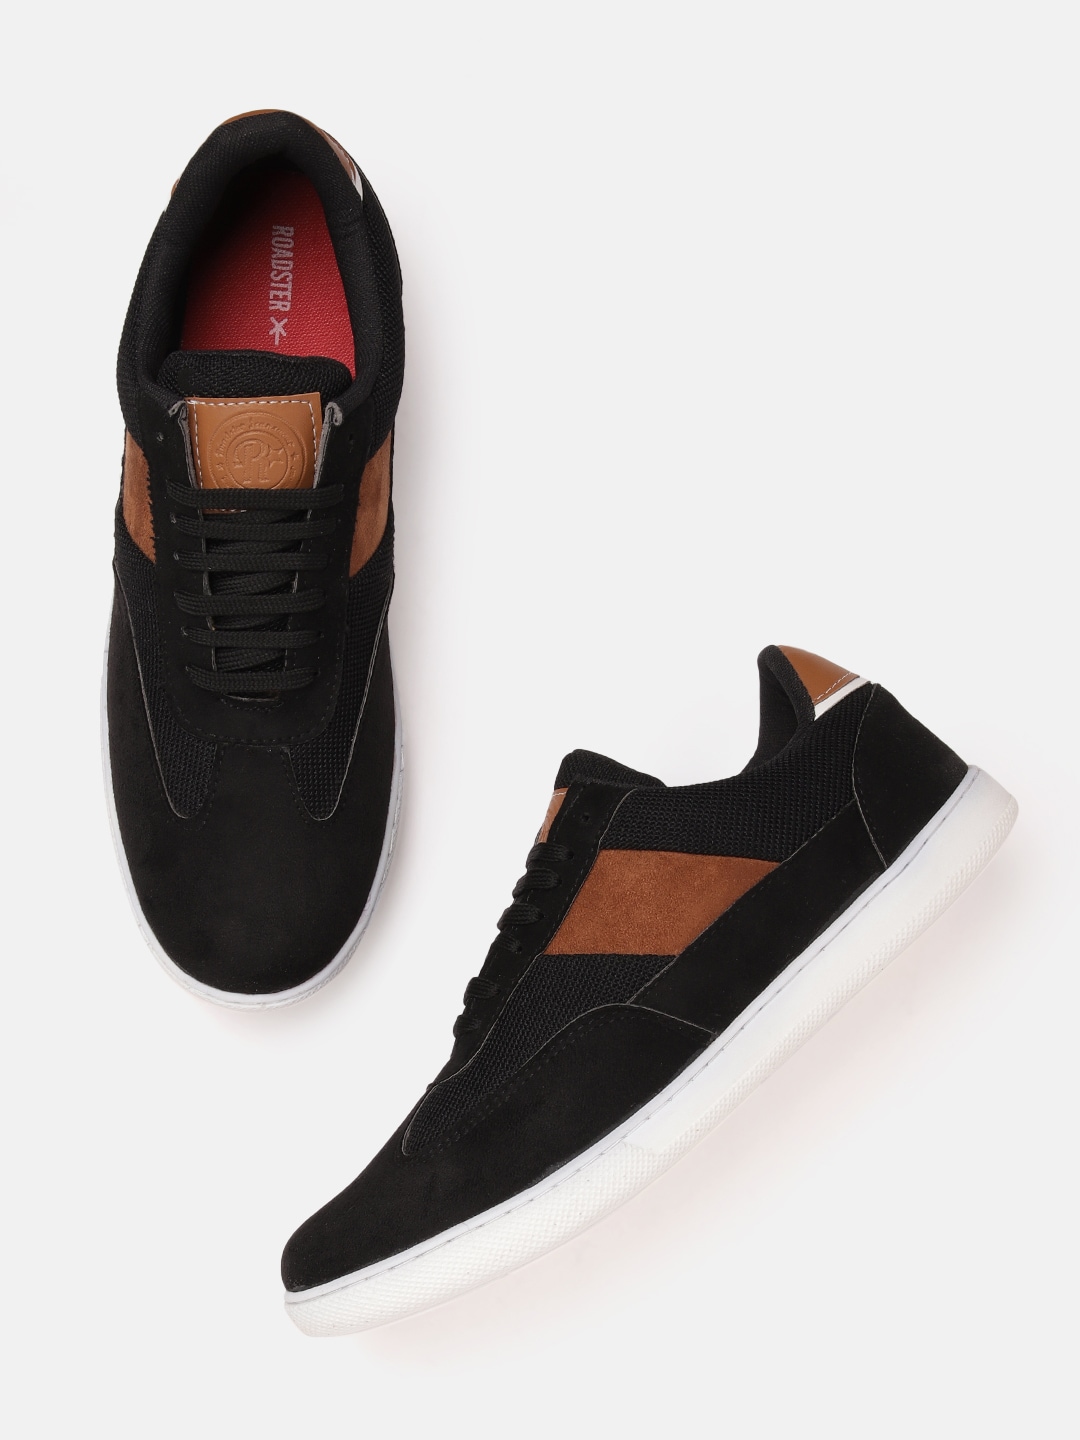 The Roadster Lifestyle Co. Men Colourblocked Sneakers